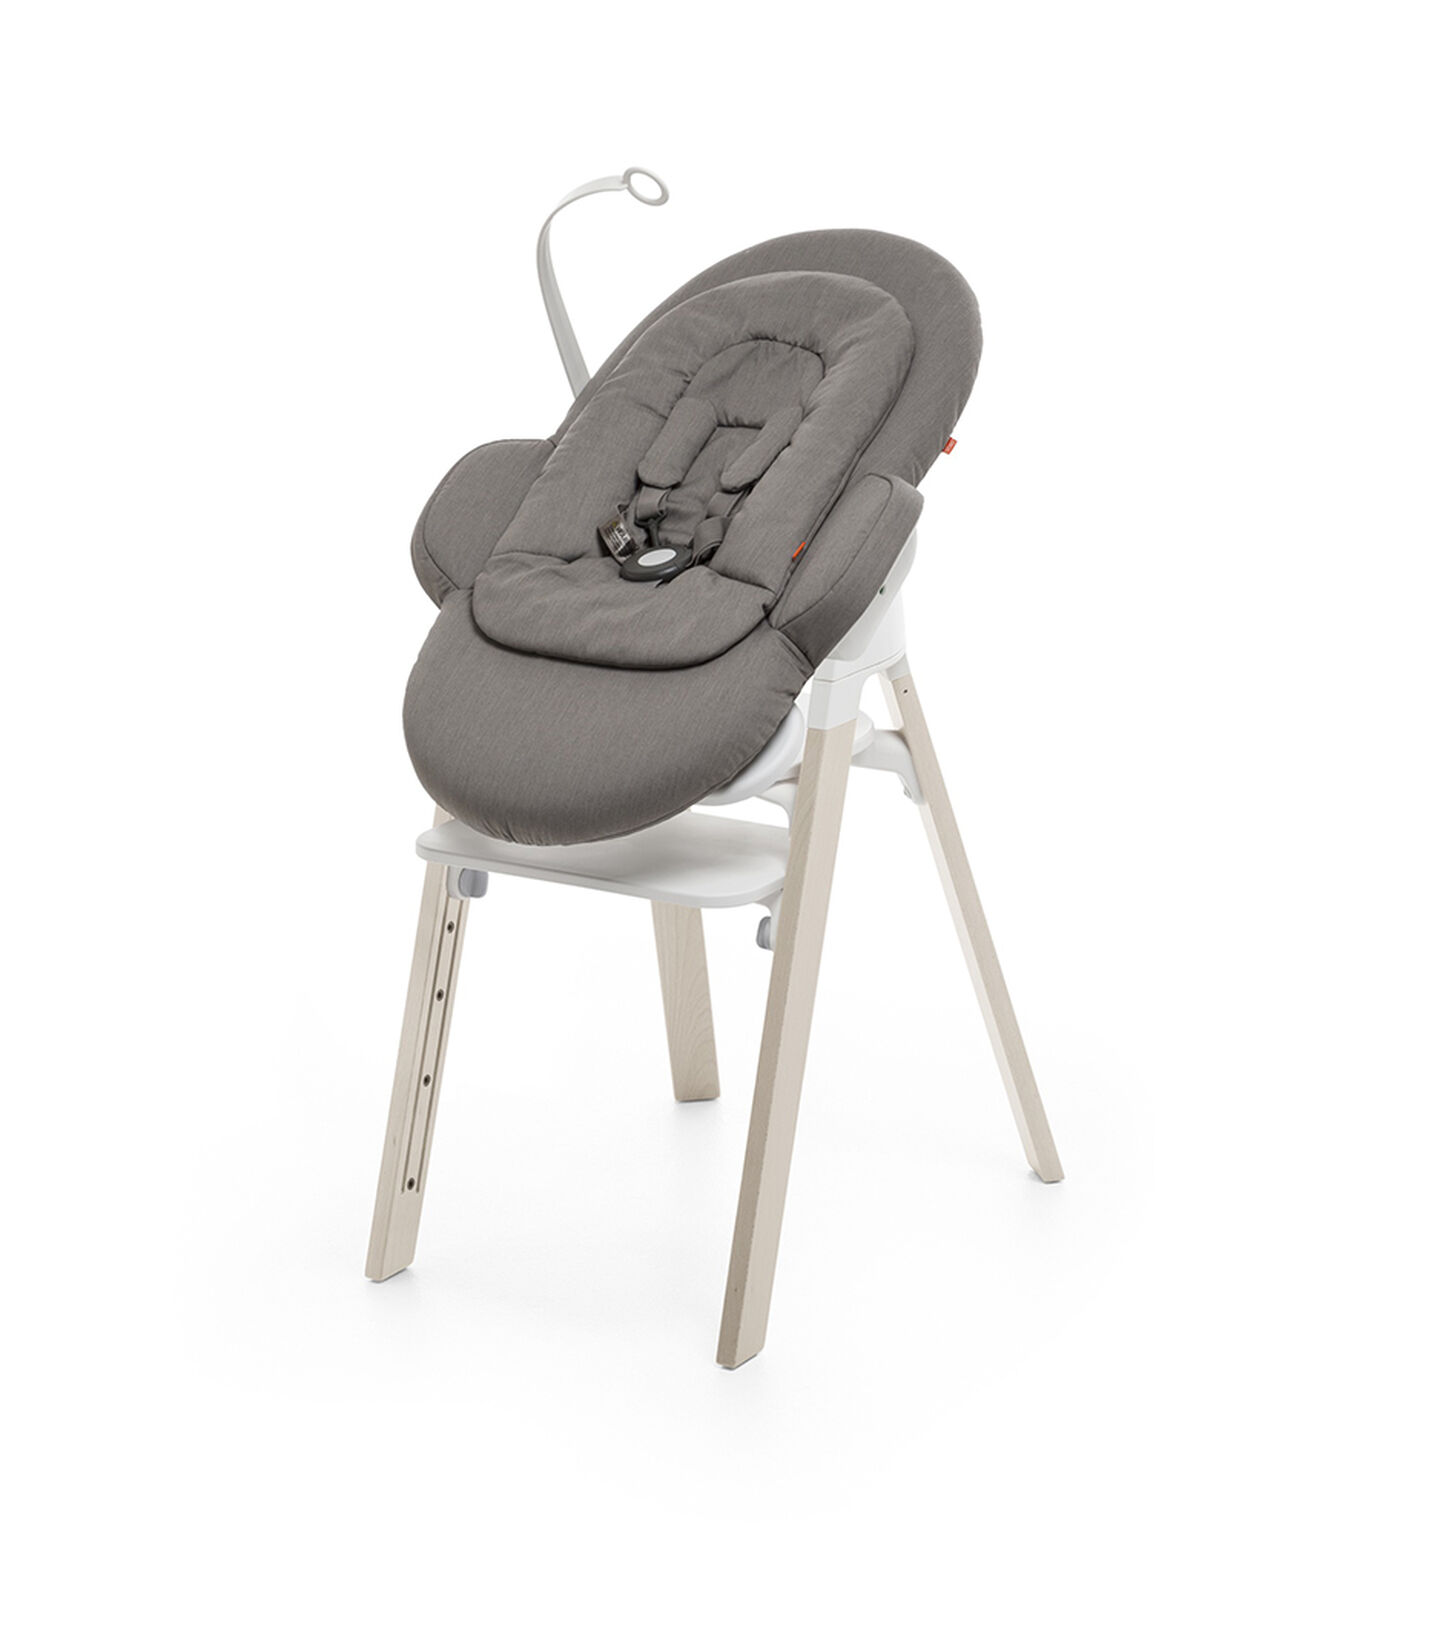 Bouncer, Greige. Mounted on Stokke Steps highchair. view 5